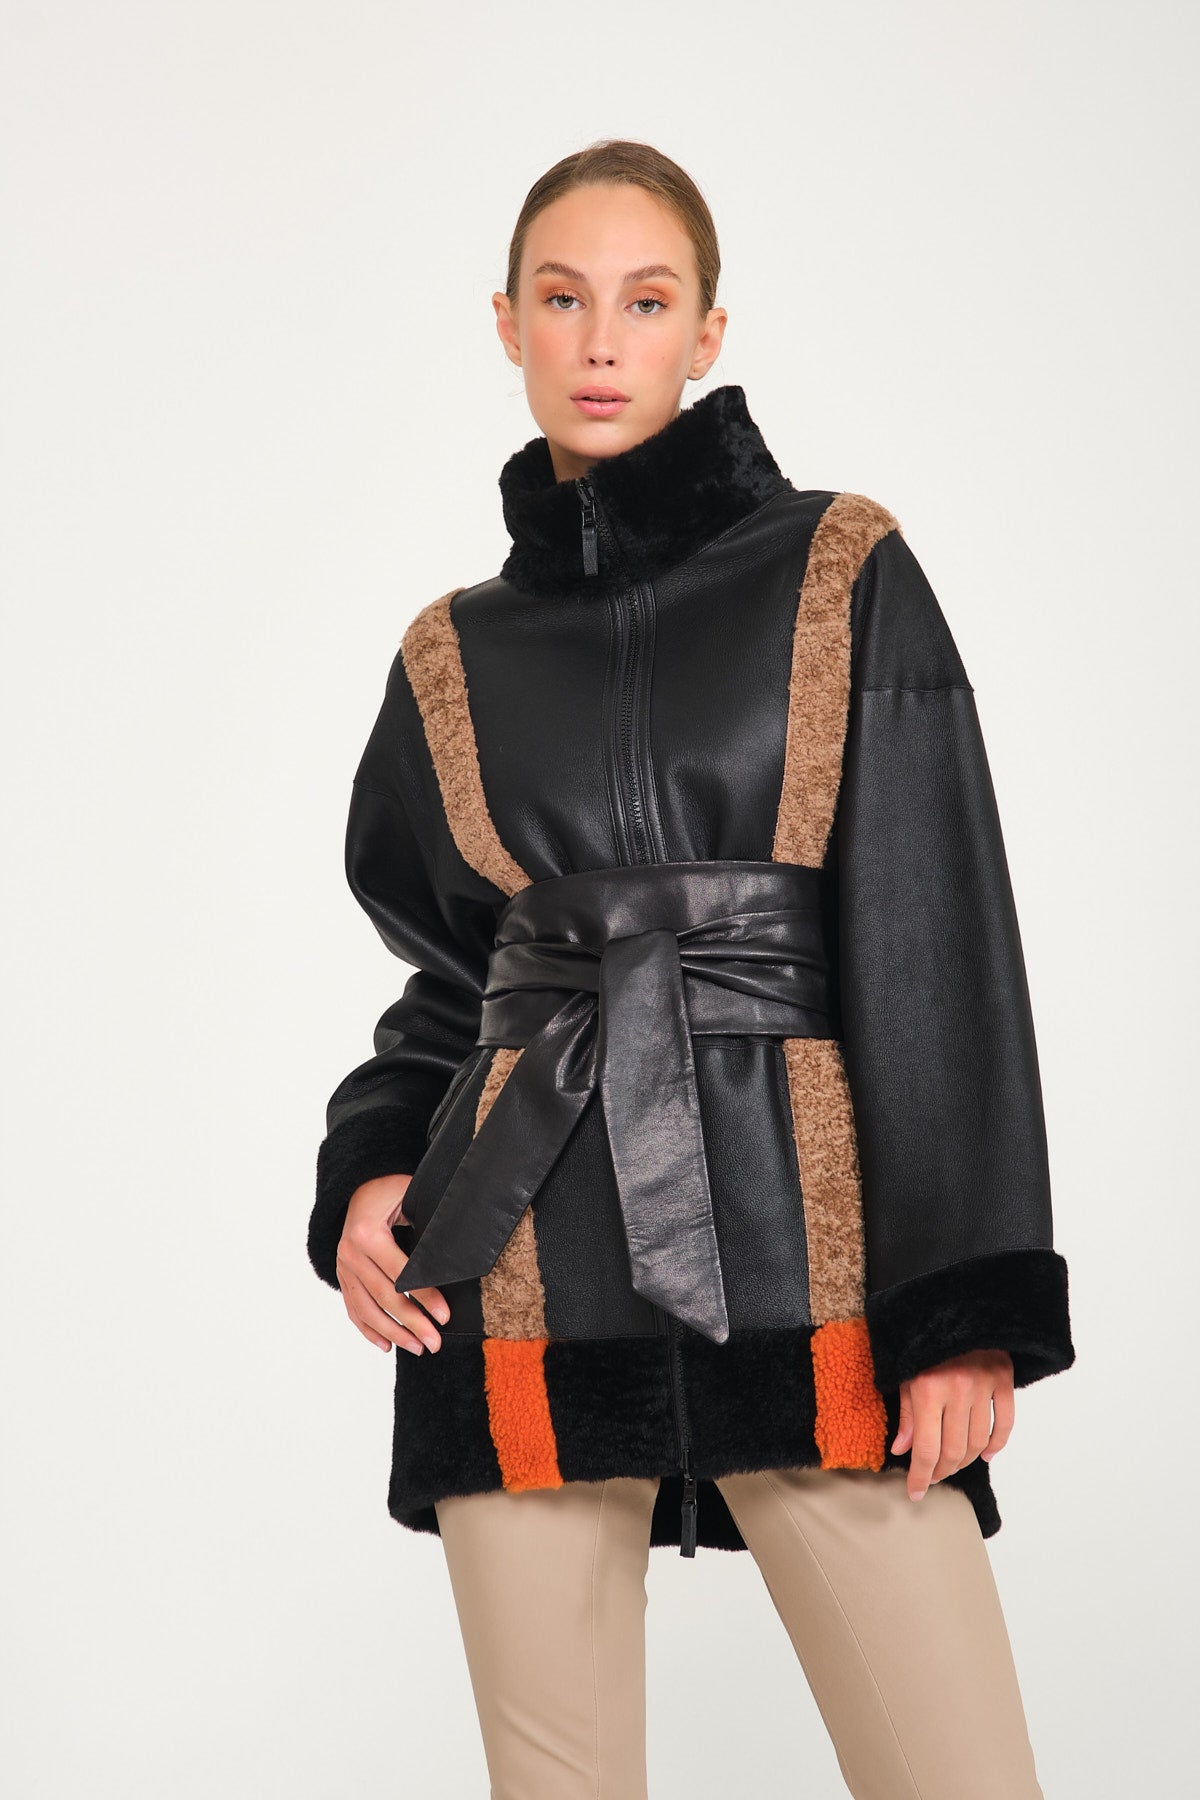 Products By Louis Vuitton: Wide Collar Sleek Cape Coat